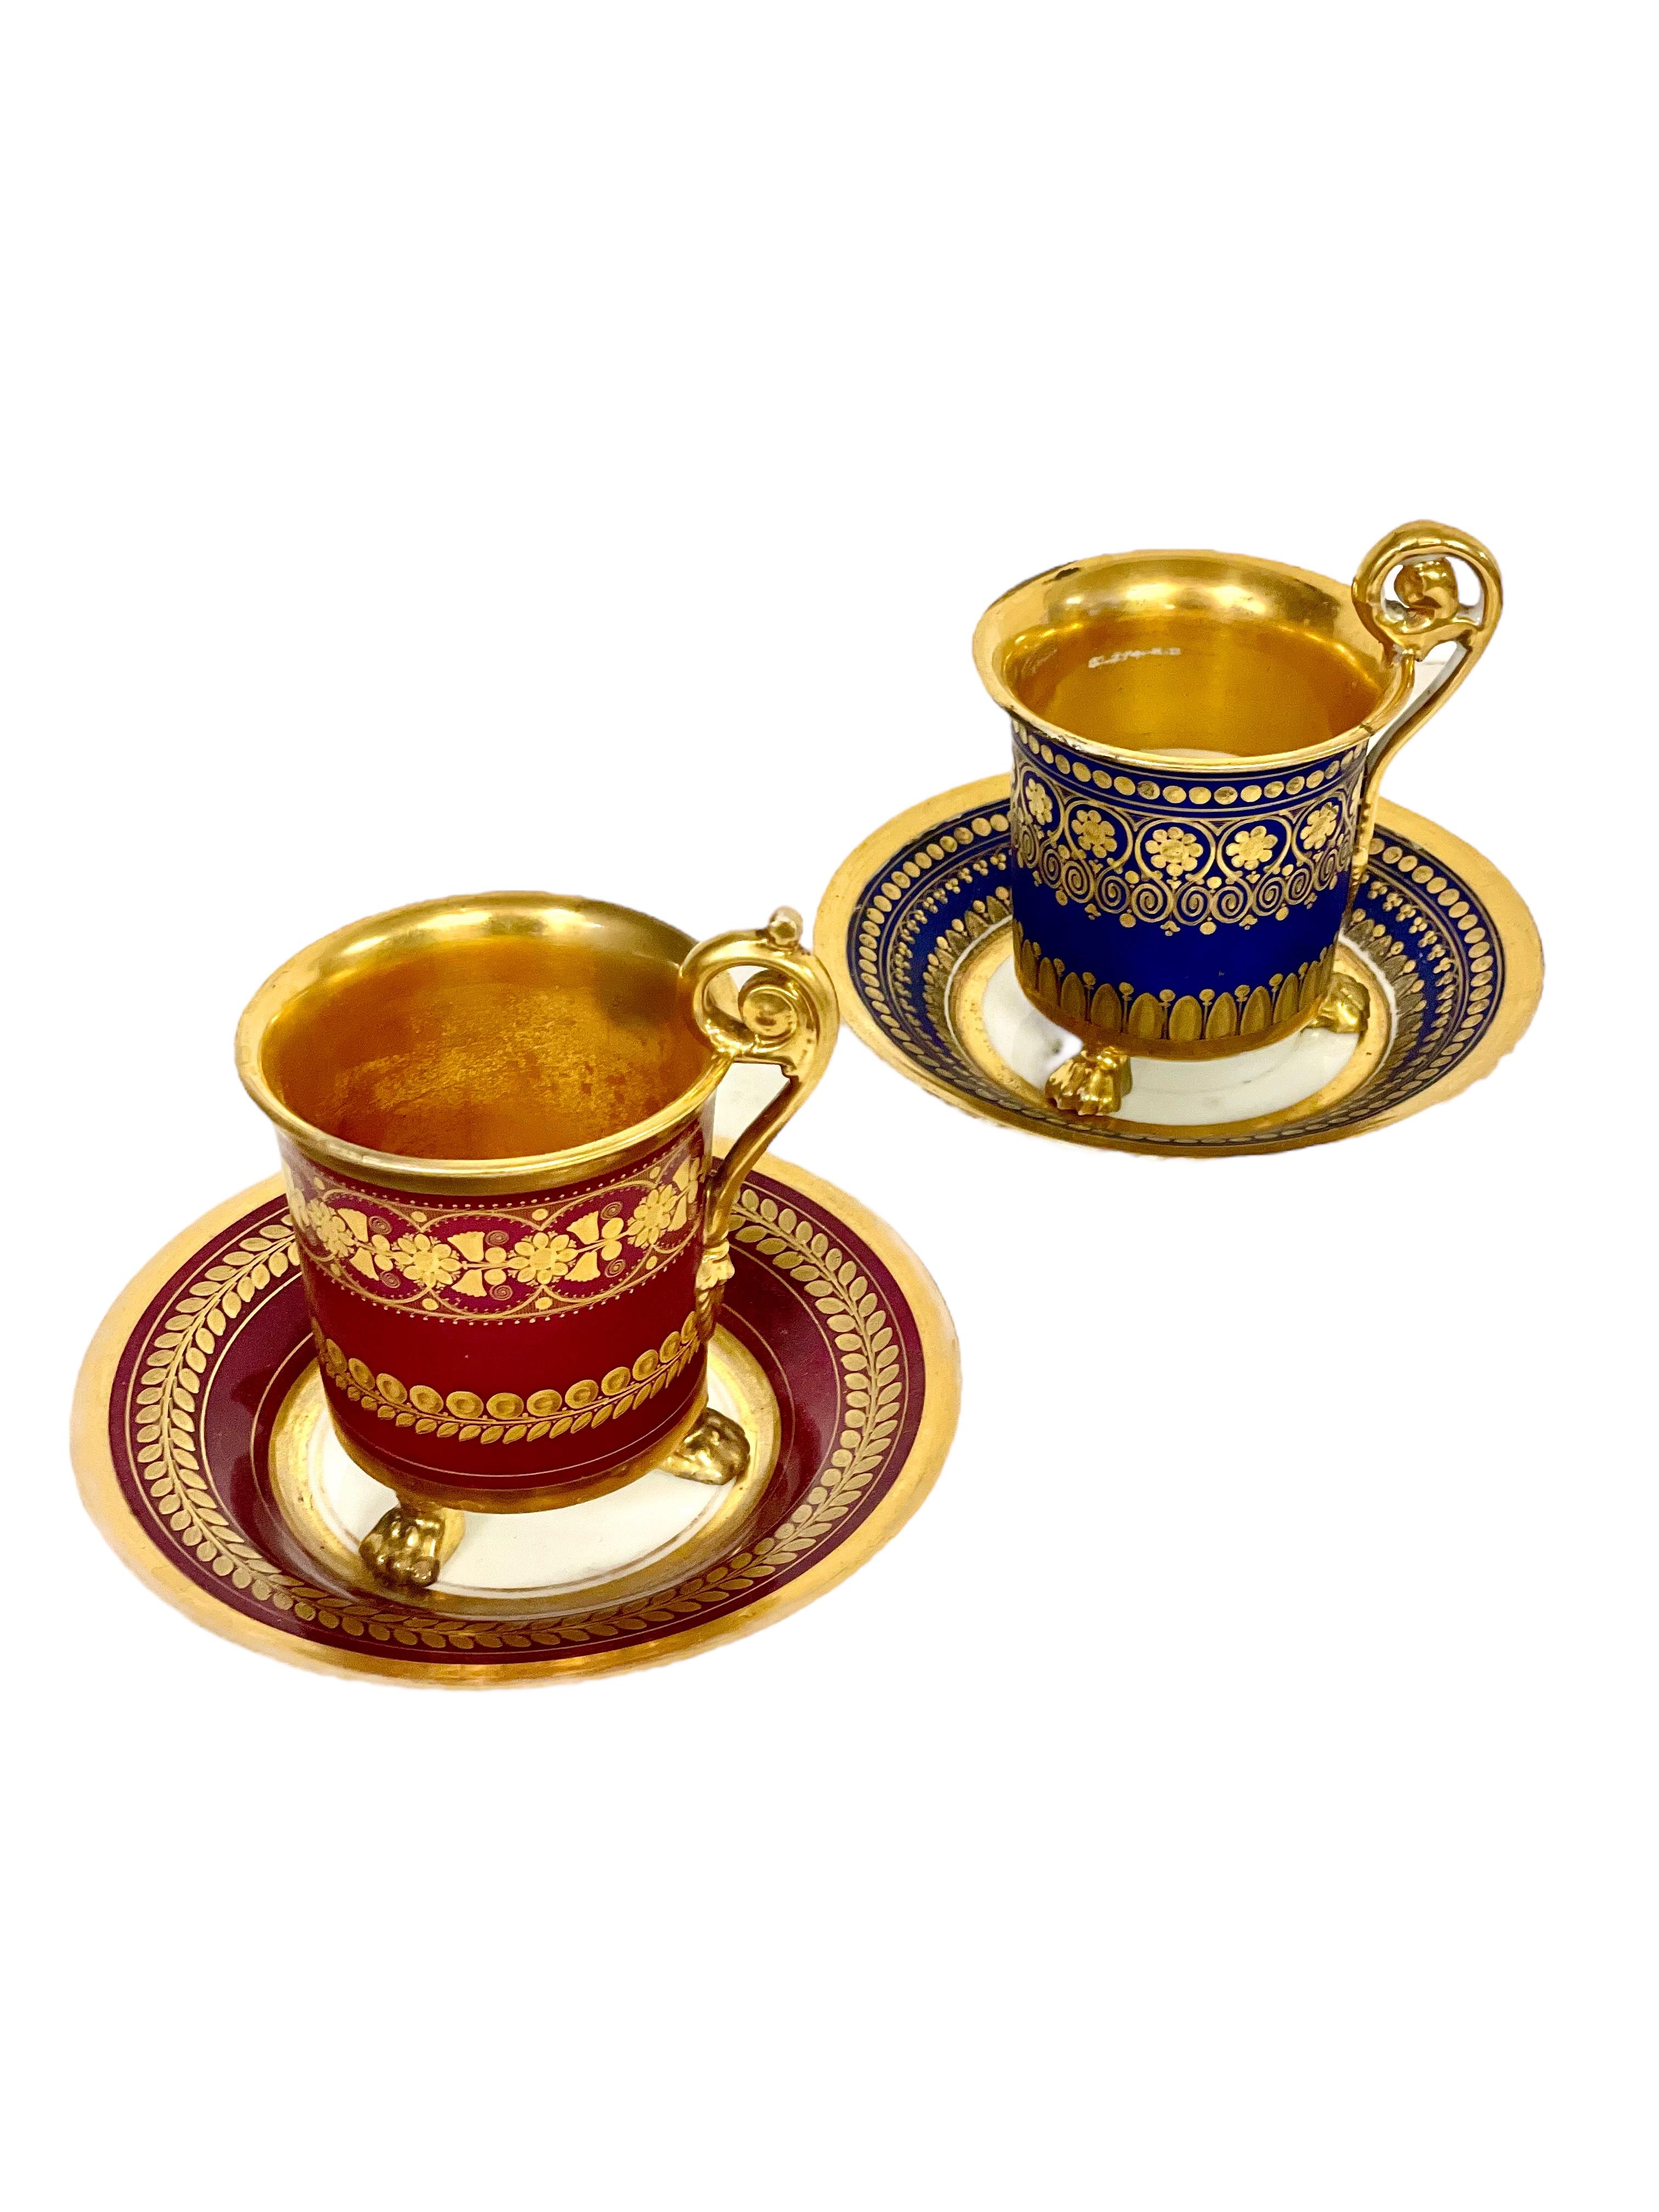 A superb pair of opulent 'Porcelain de Paris' three-footed coffee cups with matching saucers – one blue, one burgundy – each richly embellished with hand-painted gilt detailing in eye- catching geometric bands. These very stylish cups are also fully